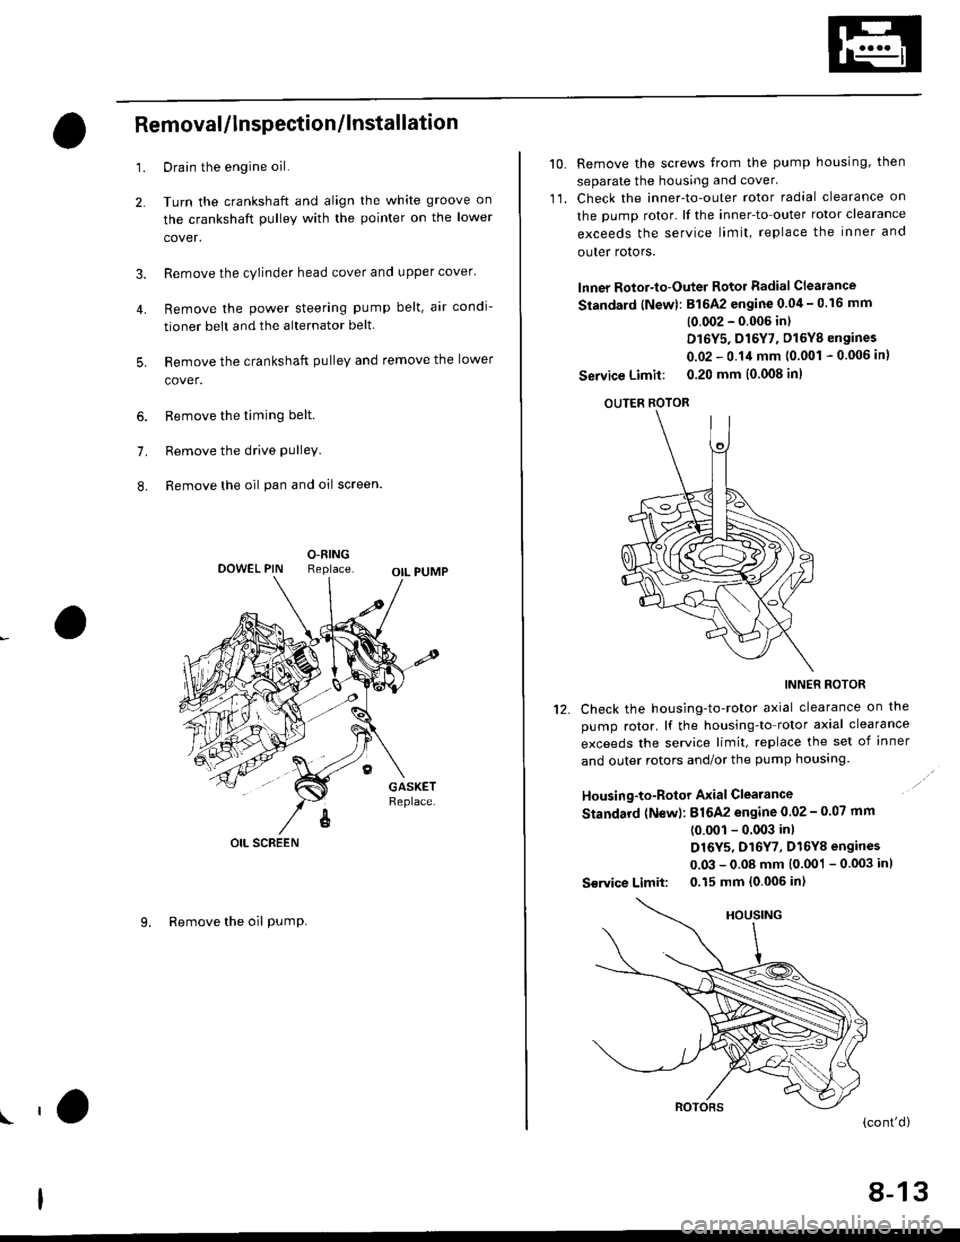 HONDA CIVIC 1999 6.G Service Manual 4.
Removal/lnspection/lnstallation
2.
3.
1.
5.
6.
1.
8.
Drain the engine oil.
Turn the crankshaft and align the white groove on
the crankshaft pulley with the pointer on the lower
cover.
Remove the cy